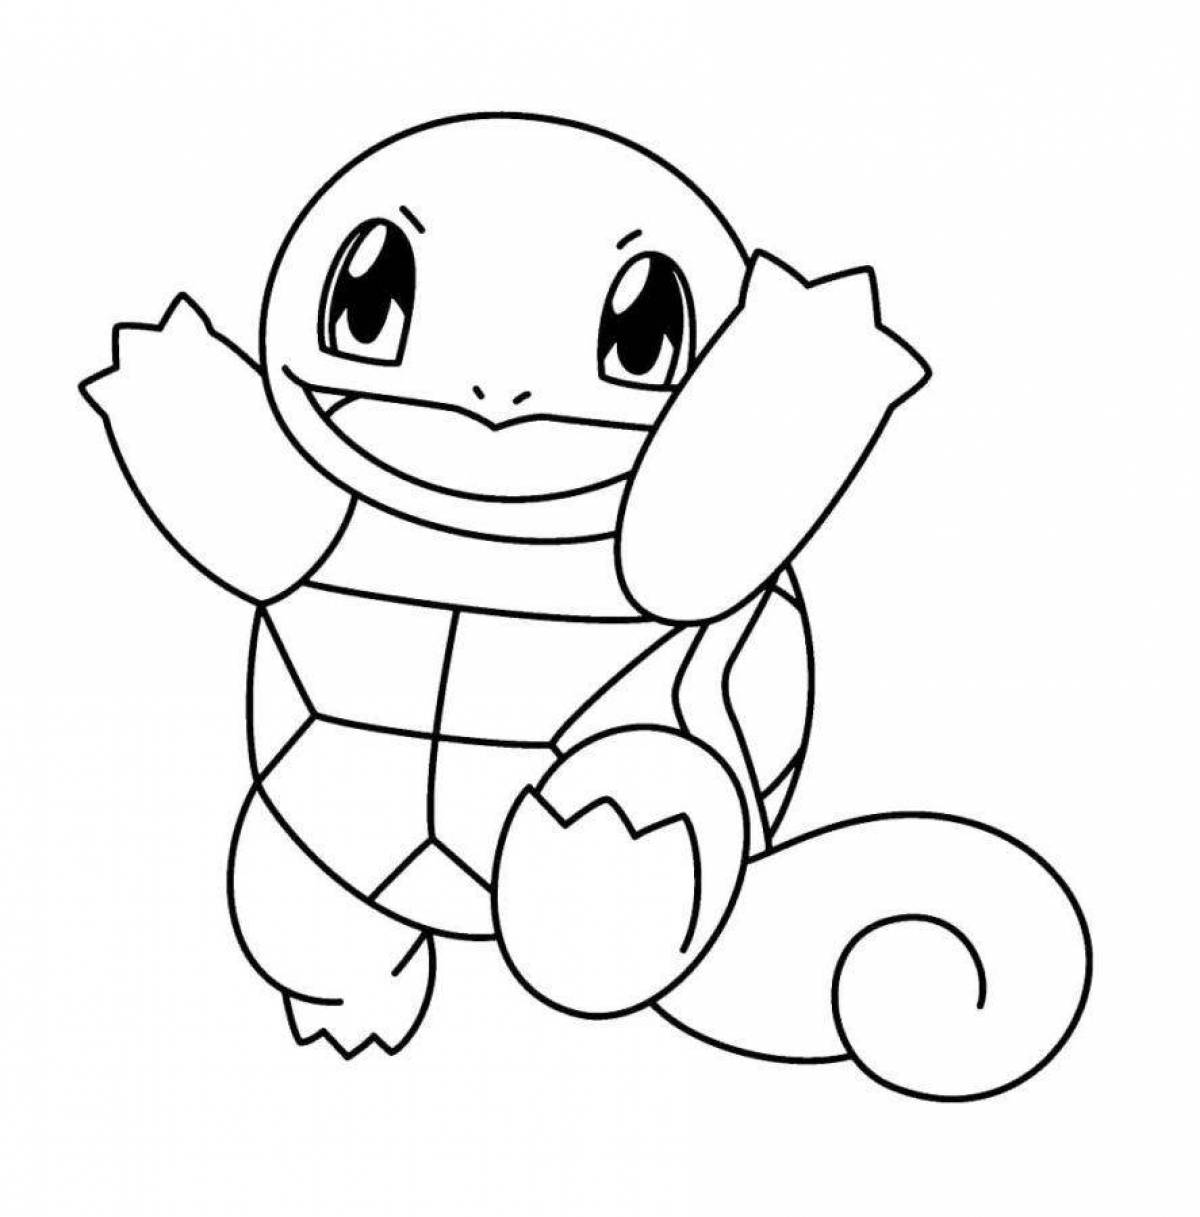 Gorgeous squirtle pokemon coloring page